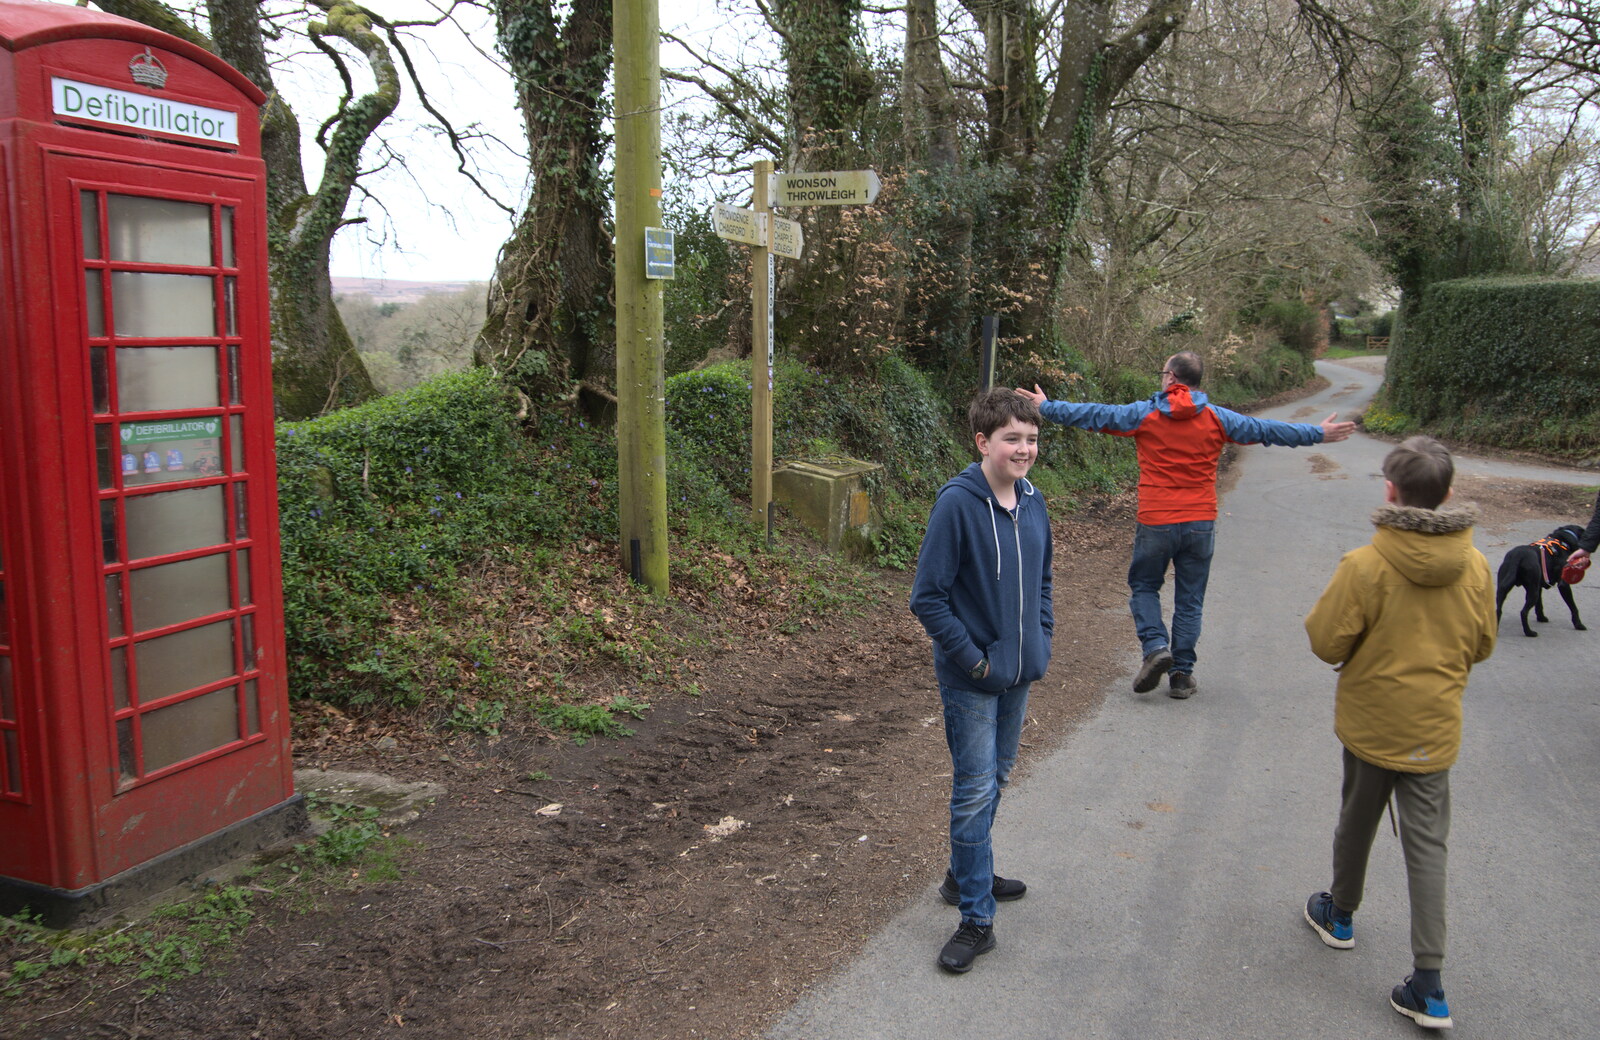 We head off for a walk from Easter in South Zeal and Moretonhampstead, Devon - 9th April